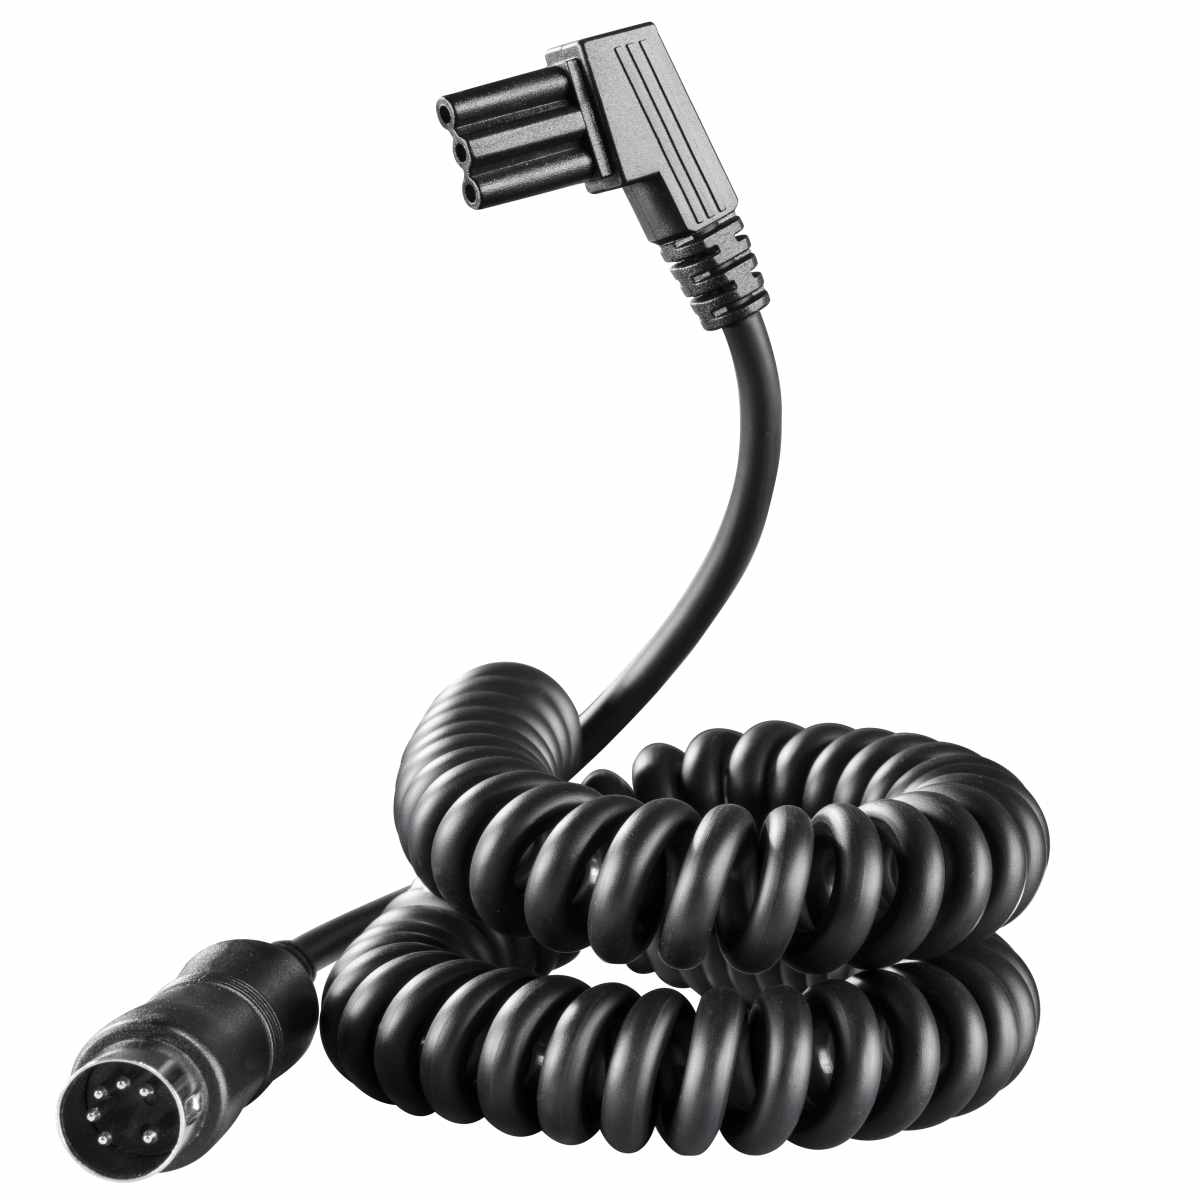 Walimex pro Powerblock Coiled Cord for Nikon